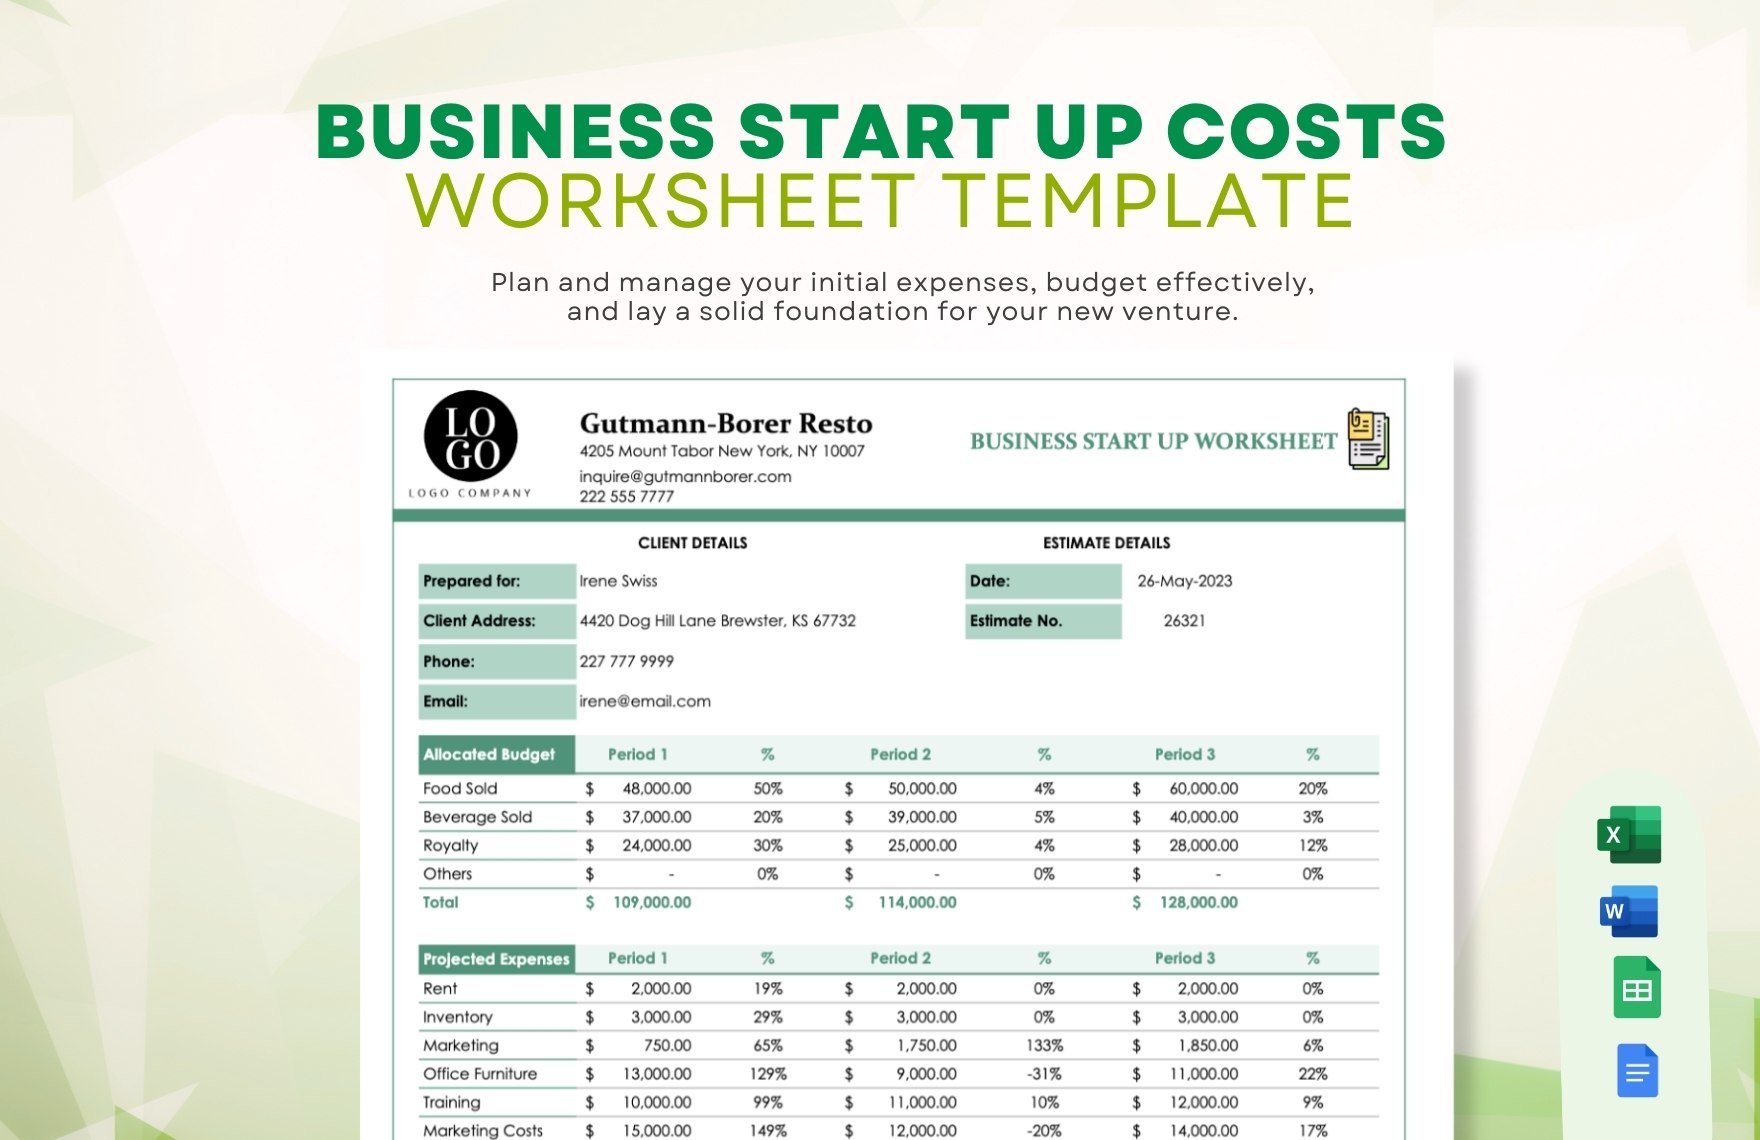 Business Start Up Costs Worksheet Template in Word, Google Docs, Excel, Google Sheets